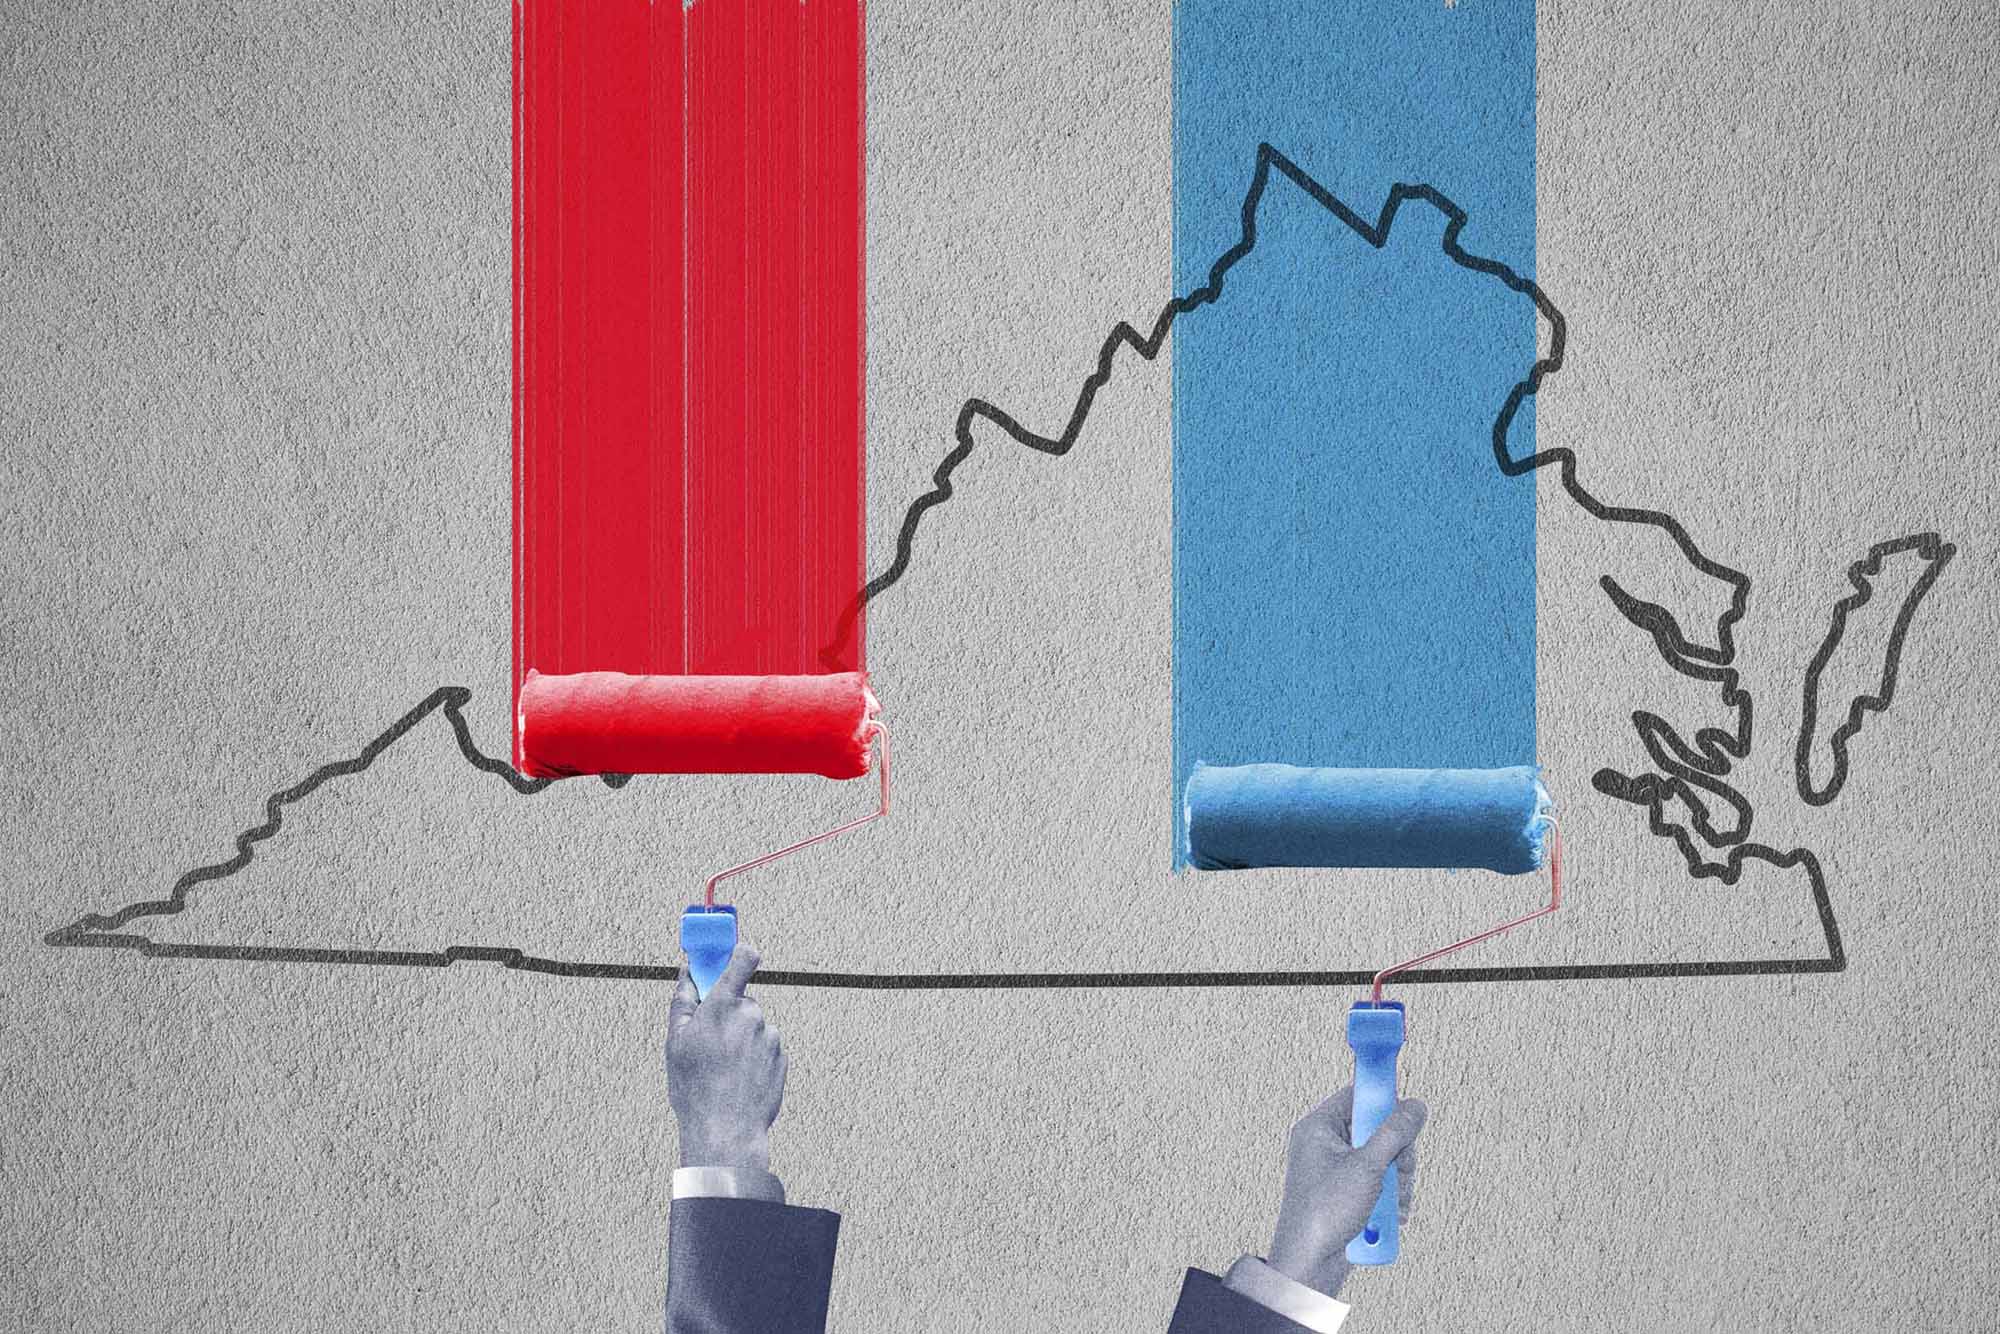 state of virginia with two paint rollers adding paint onto VA.  One roller is blue and one roller is red